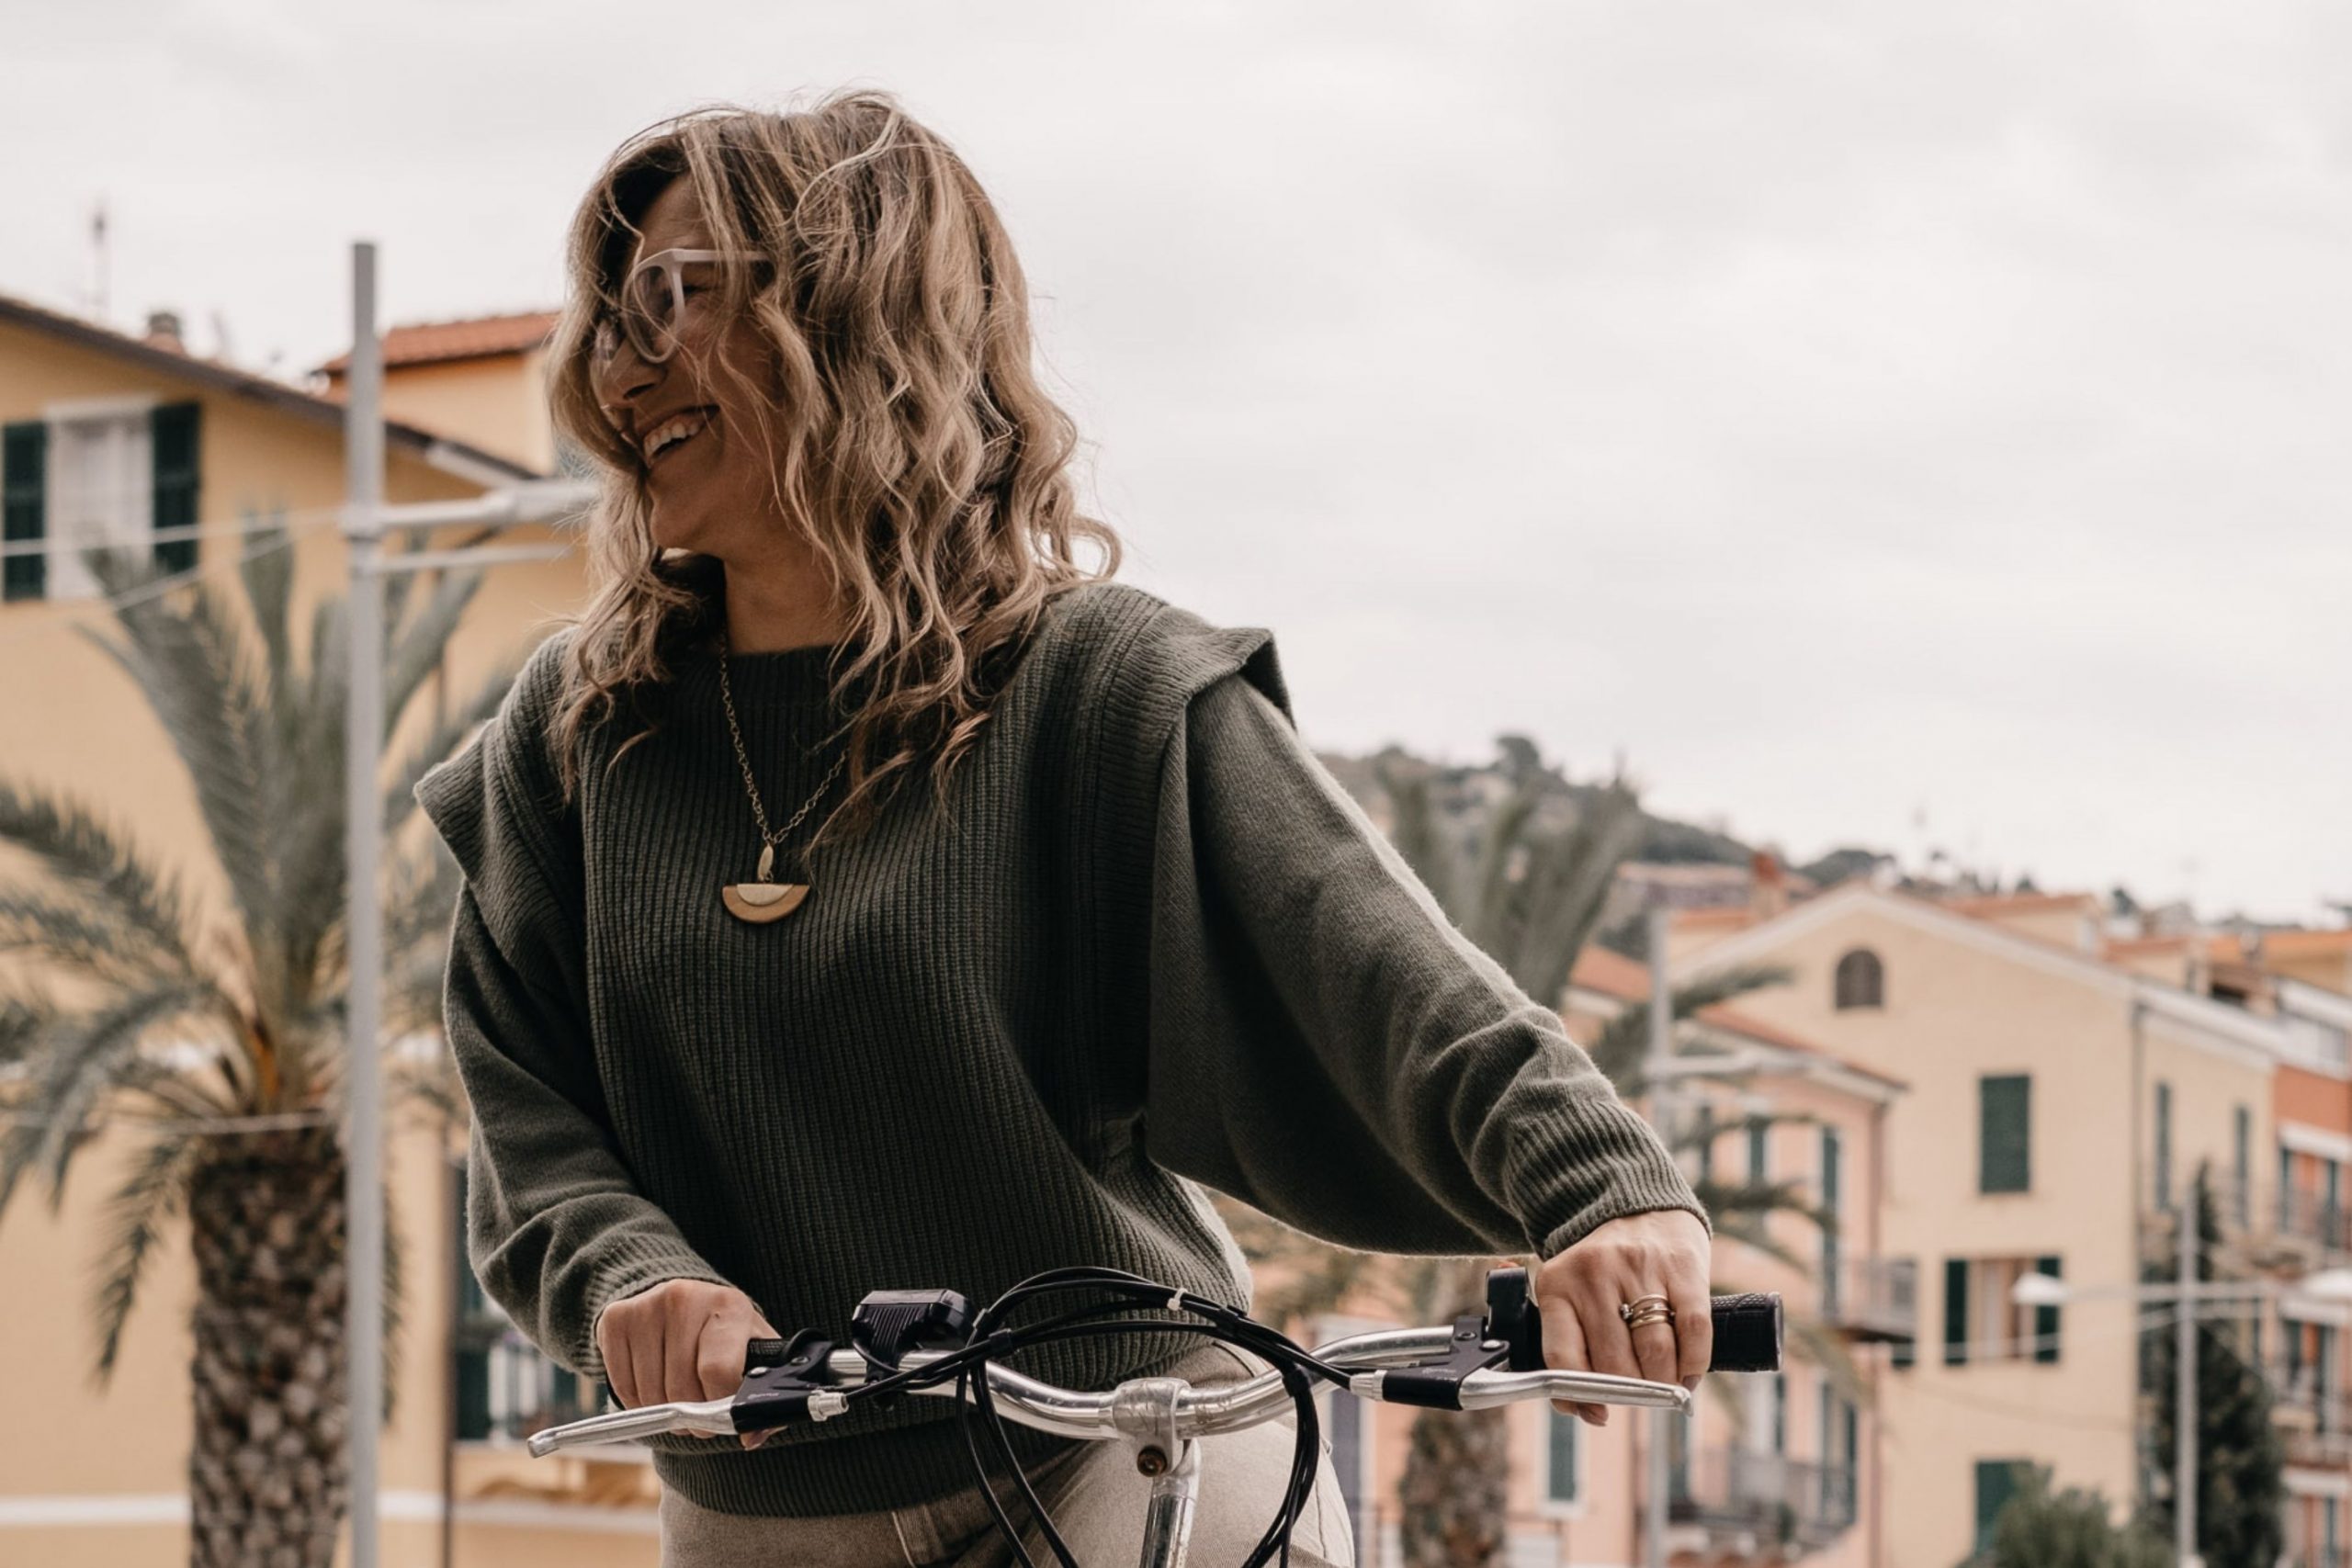 Floriana, the soul of Vayadù, smiles as she gets on a bike she rented in Ospedaletti and sets out for the cycle path of the Riviera dei Fiori coastal park.